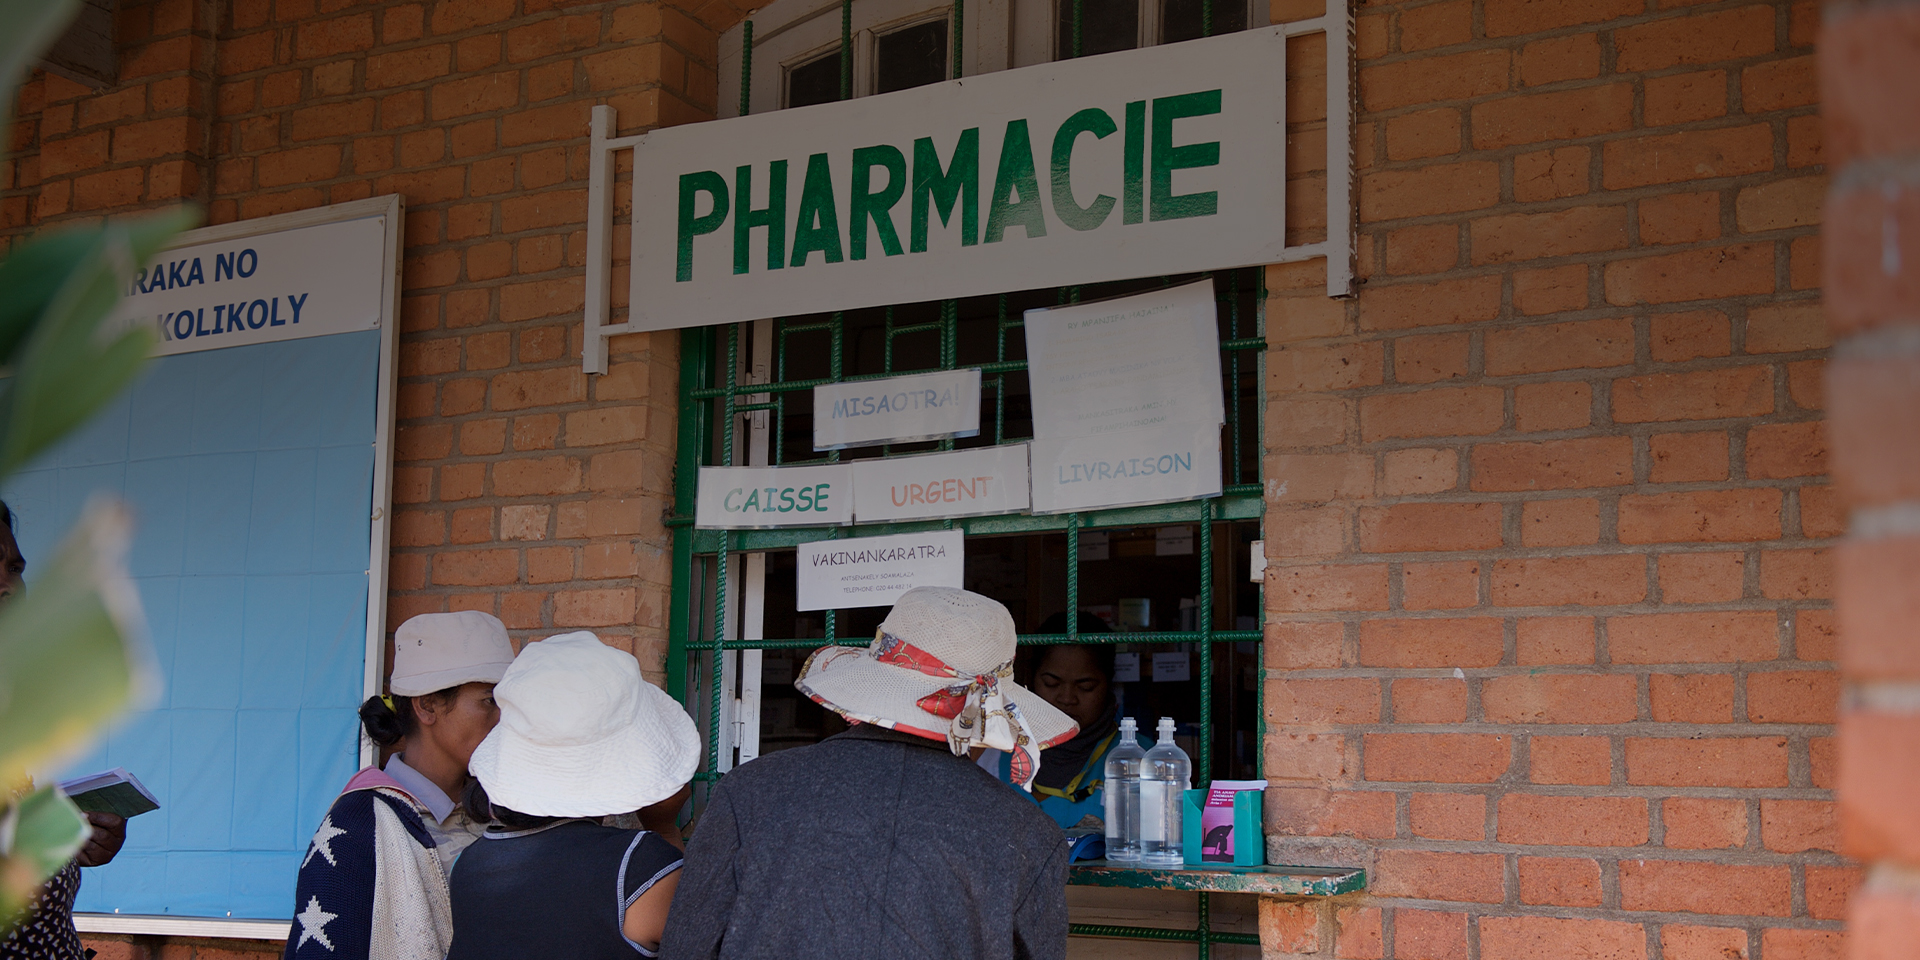 People standing at the window of a pharmacy being served by a technician.